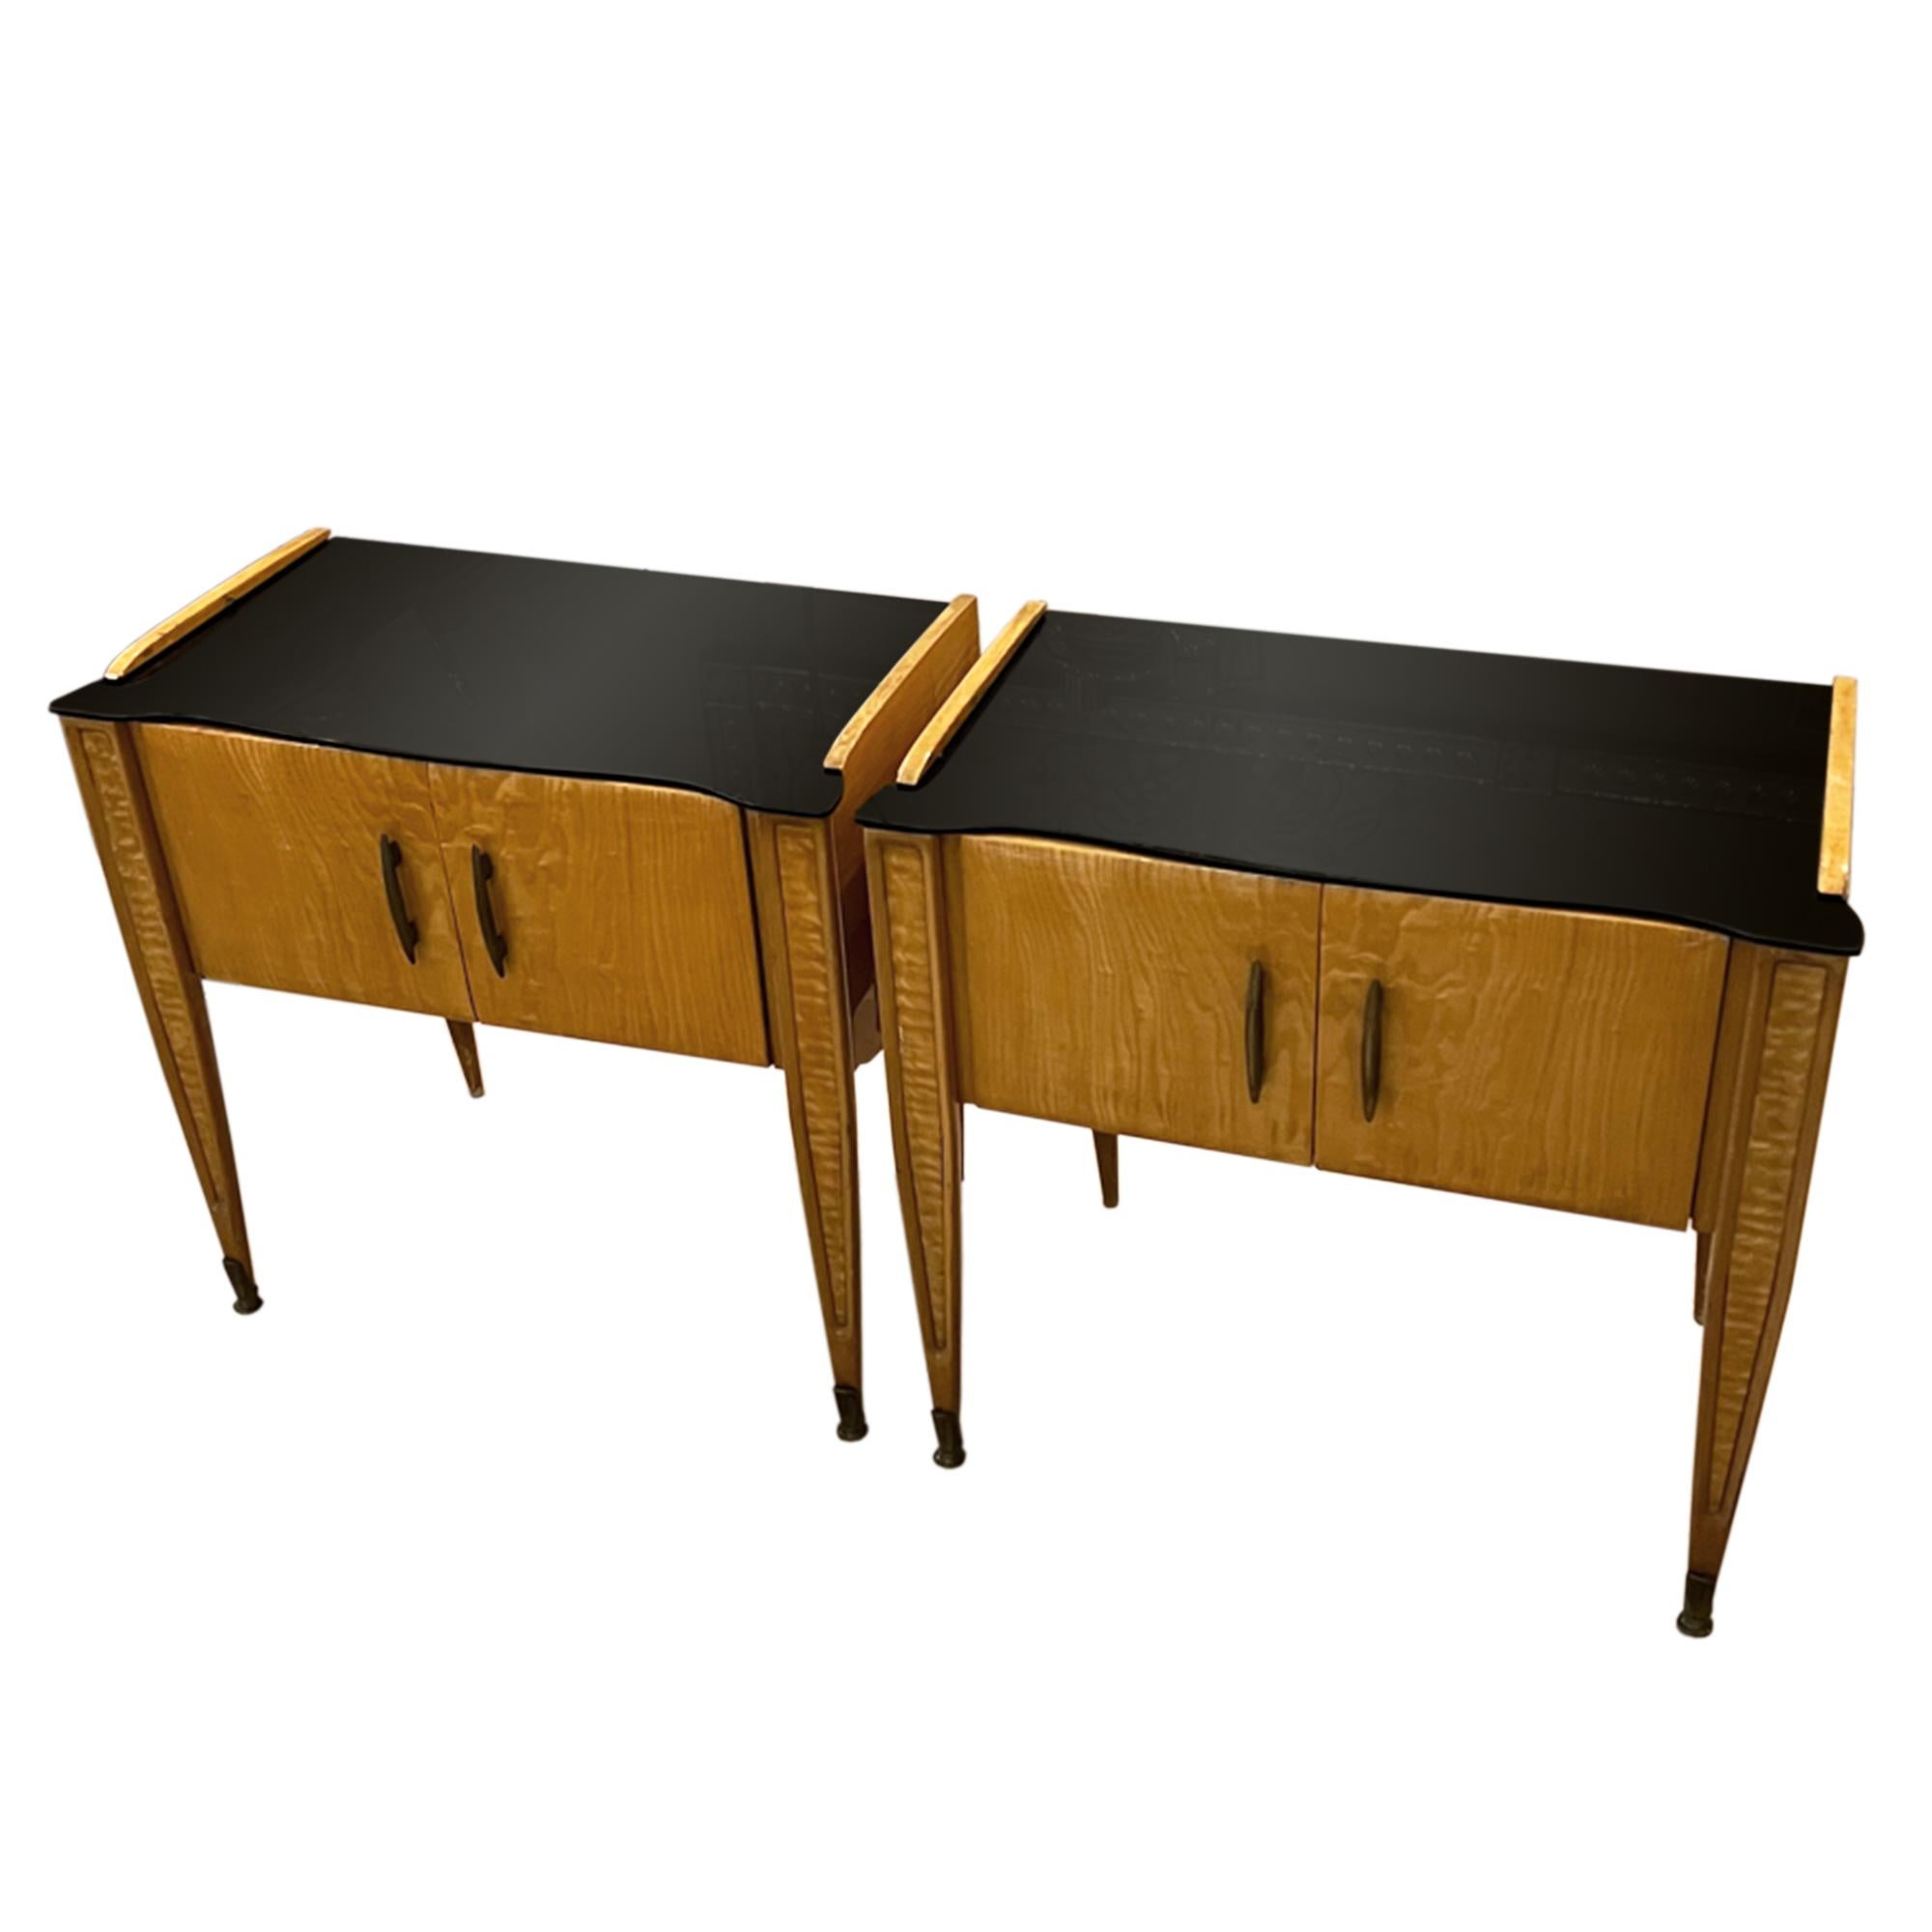 A lovely pair of bedside tables - neat, elegant design with good storage. 

These nightstands have stylish black glass tops and tapered legs finishing in metal feet at the front. 

Made from birch wood in Italy in the 1950s.